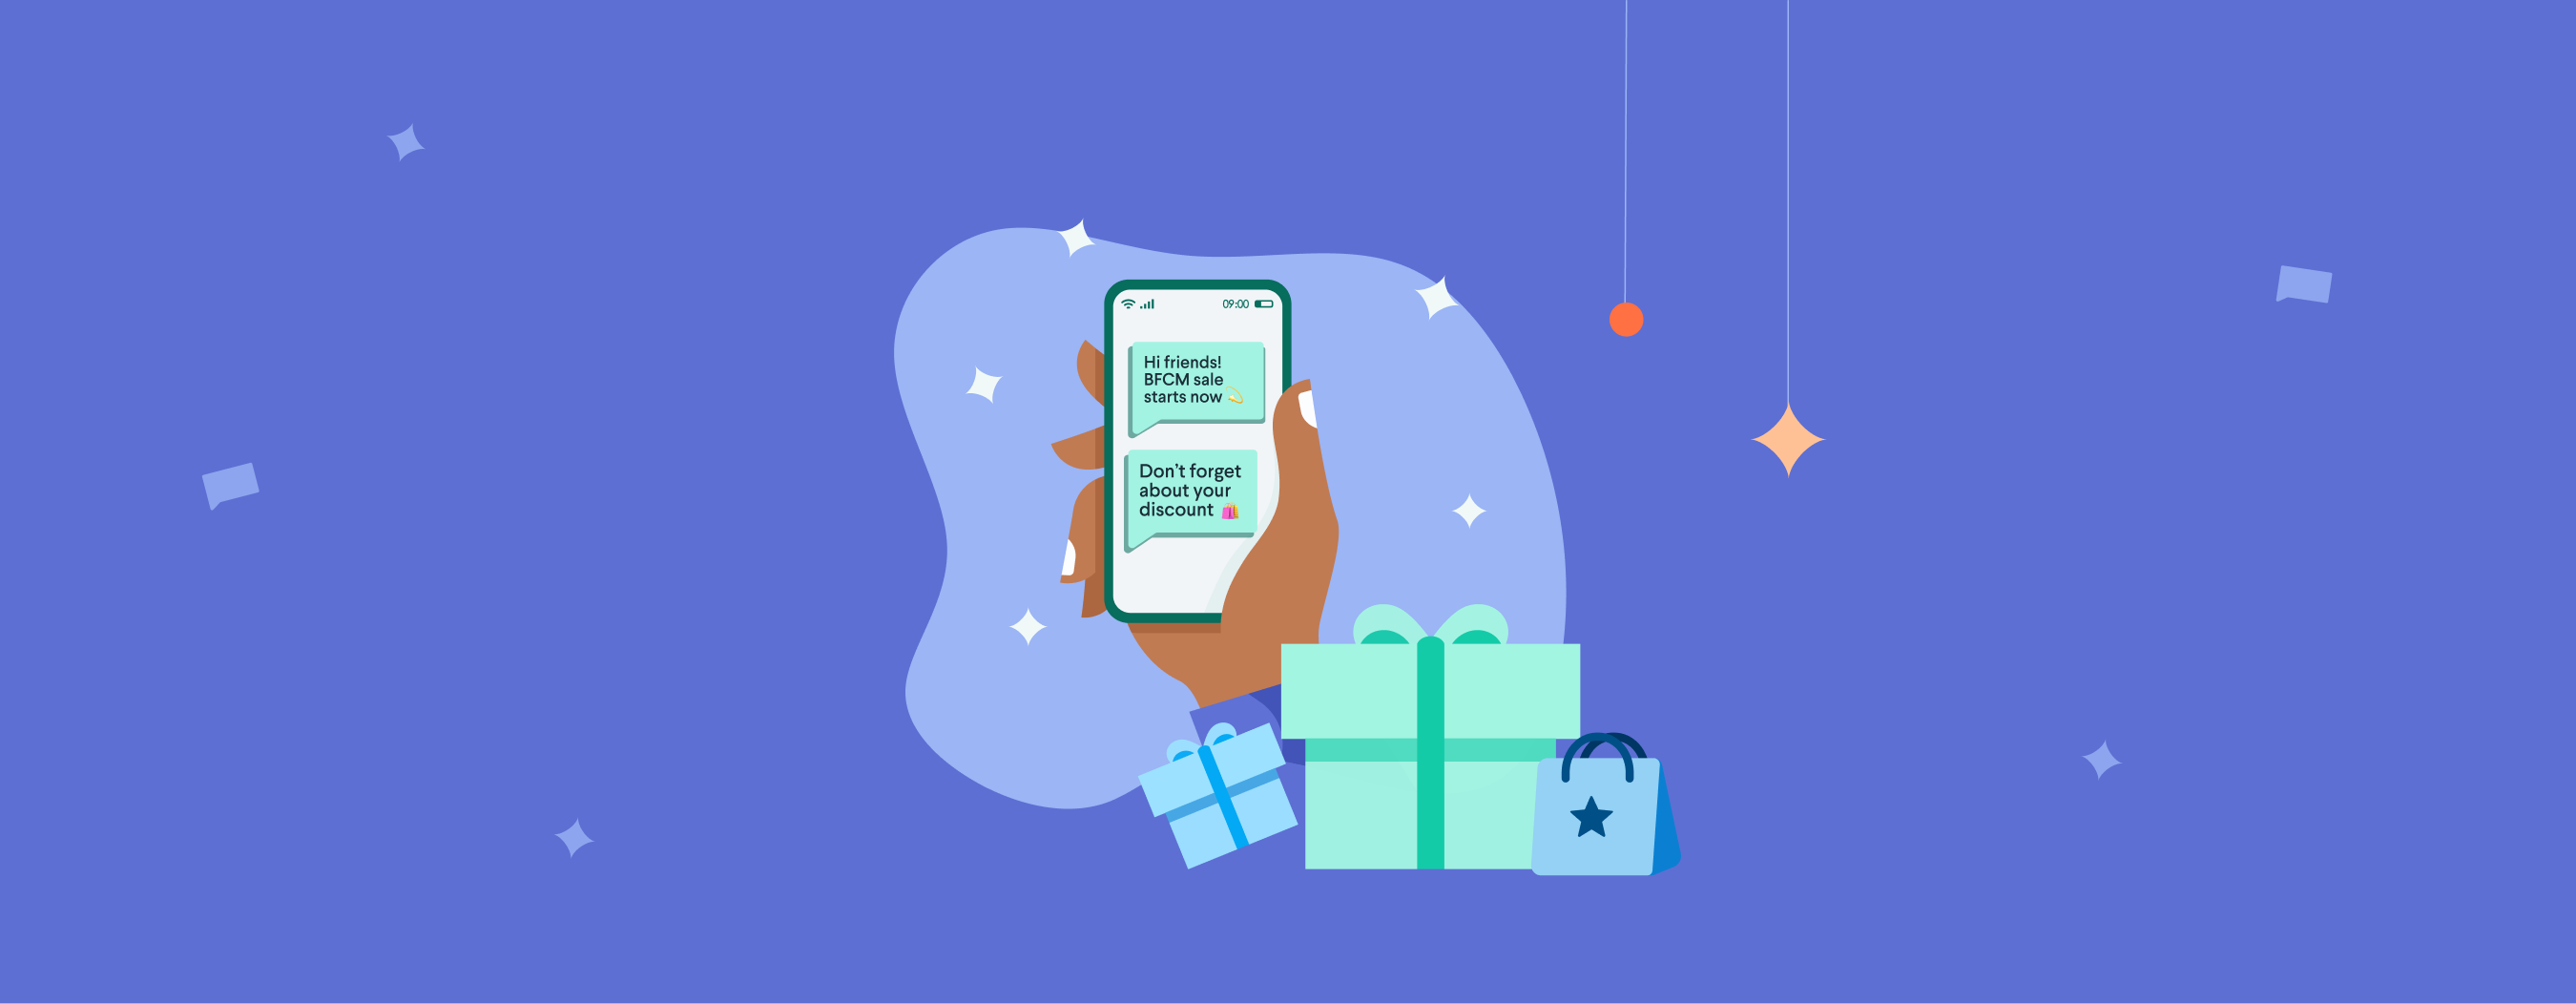 SMS Playbook: Tips and Strategies to Win the 2021 Holiday Season